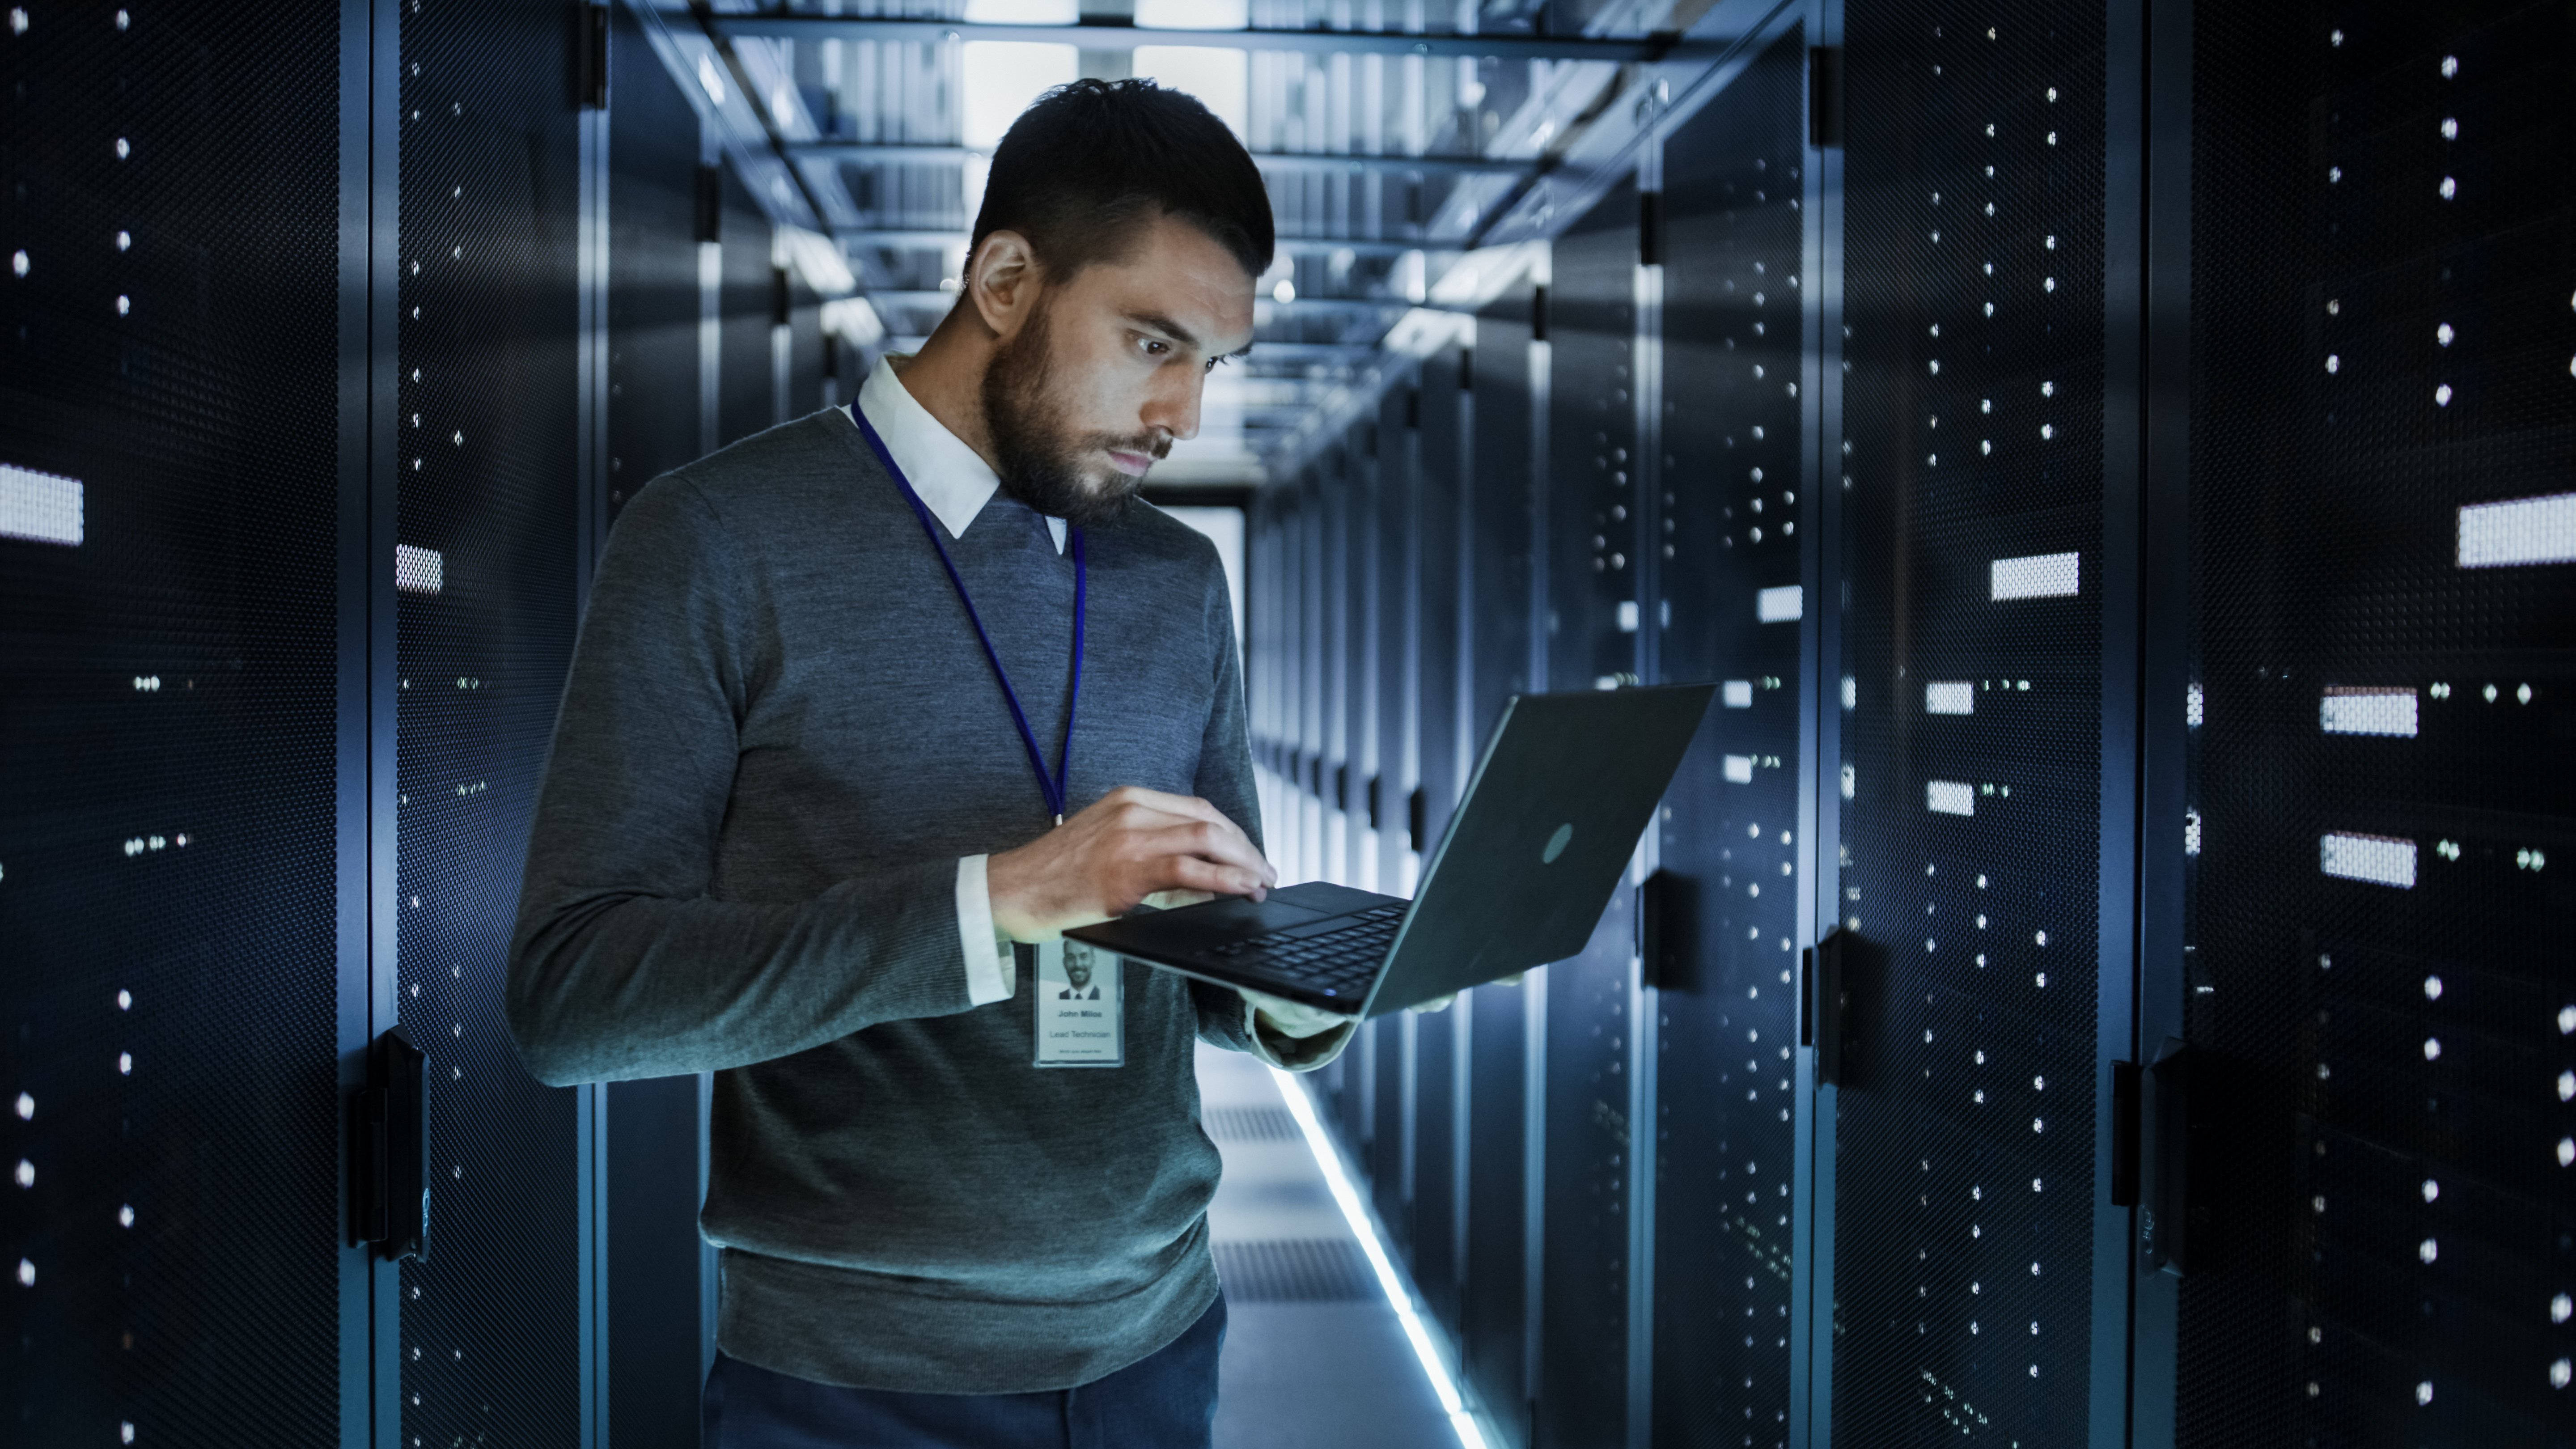 Network administrator holding laptop while standing in data centre